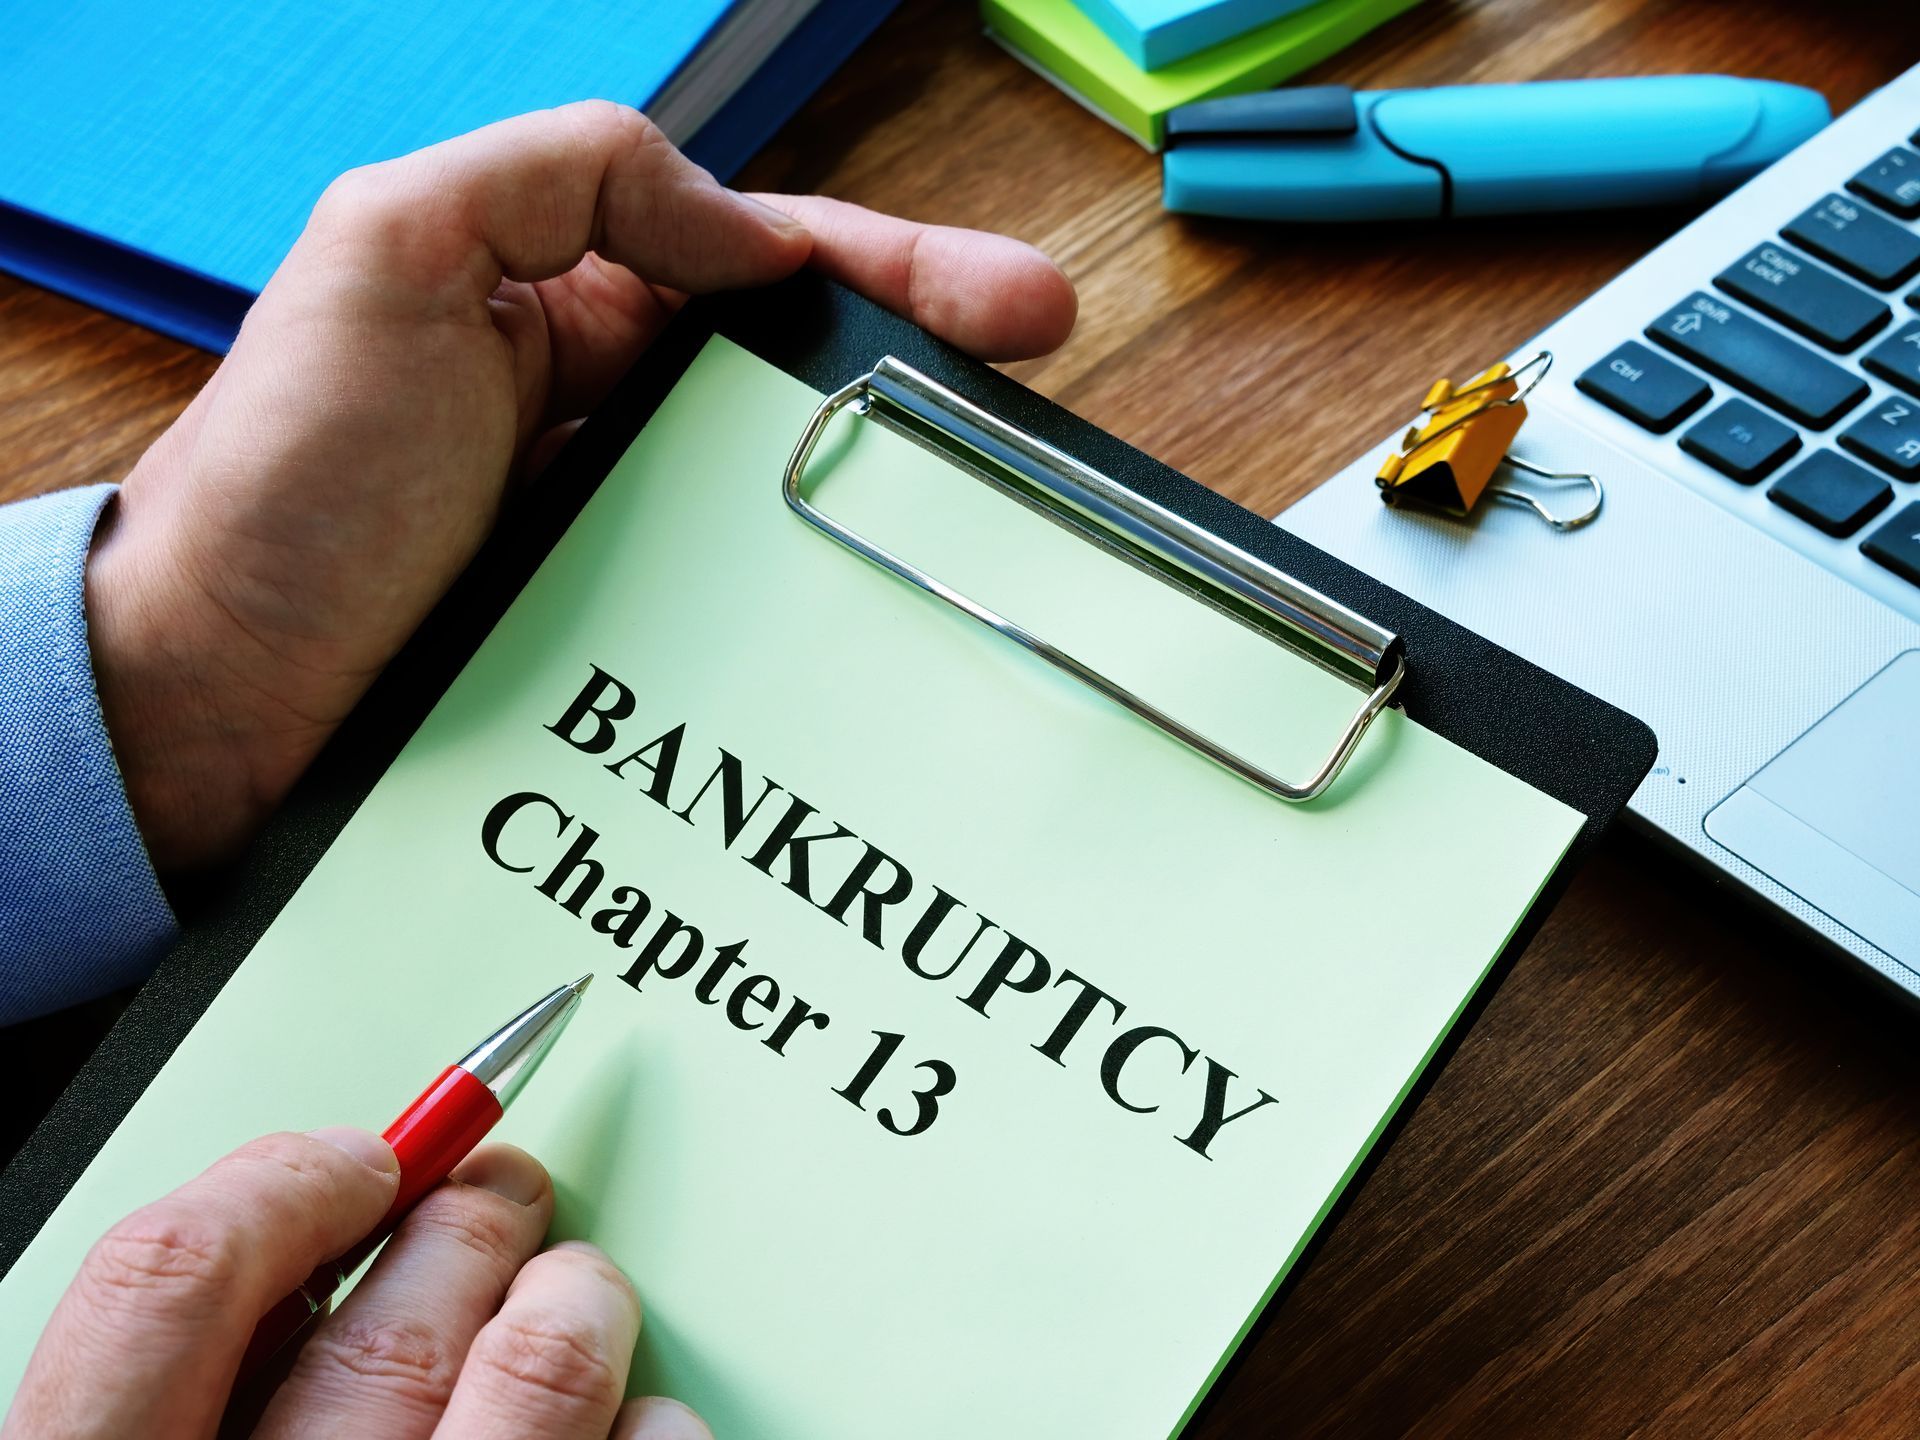 Chapter 13 bankruptcy attorney